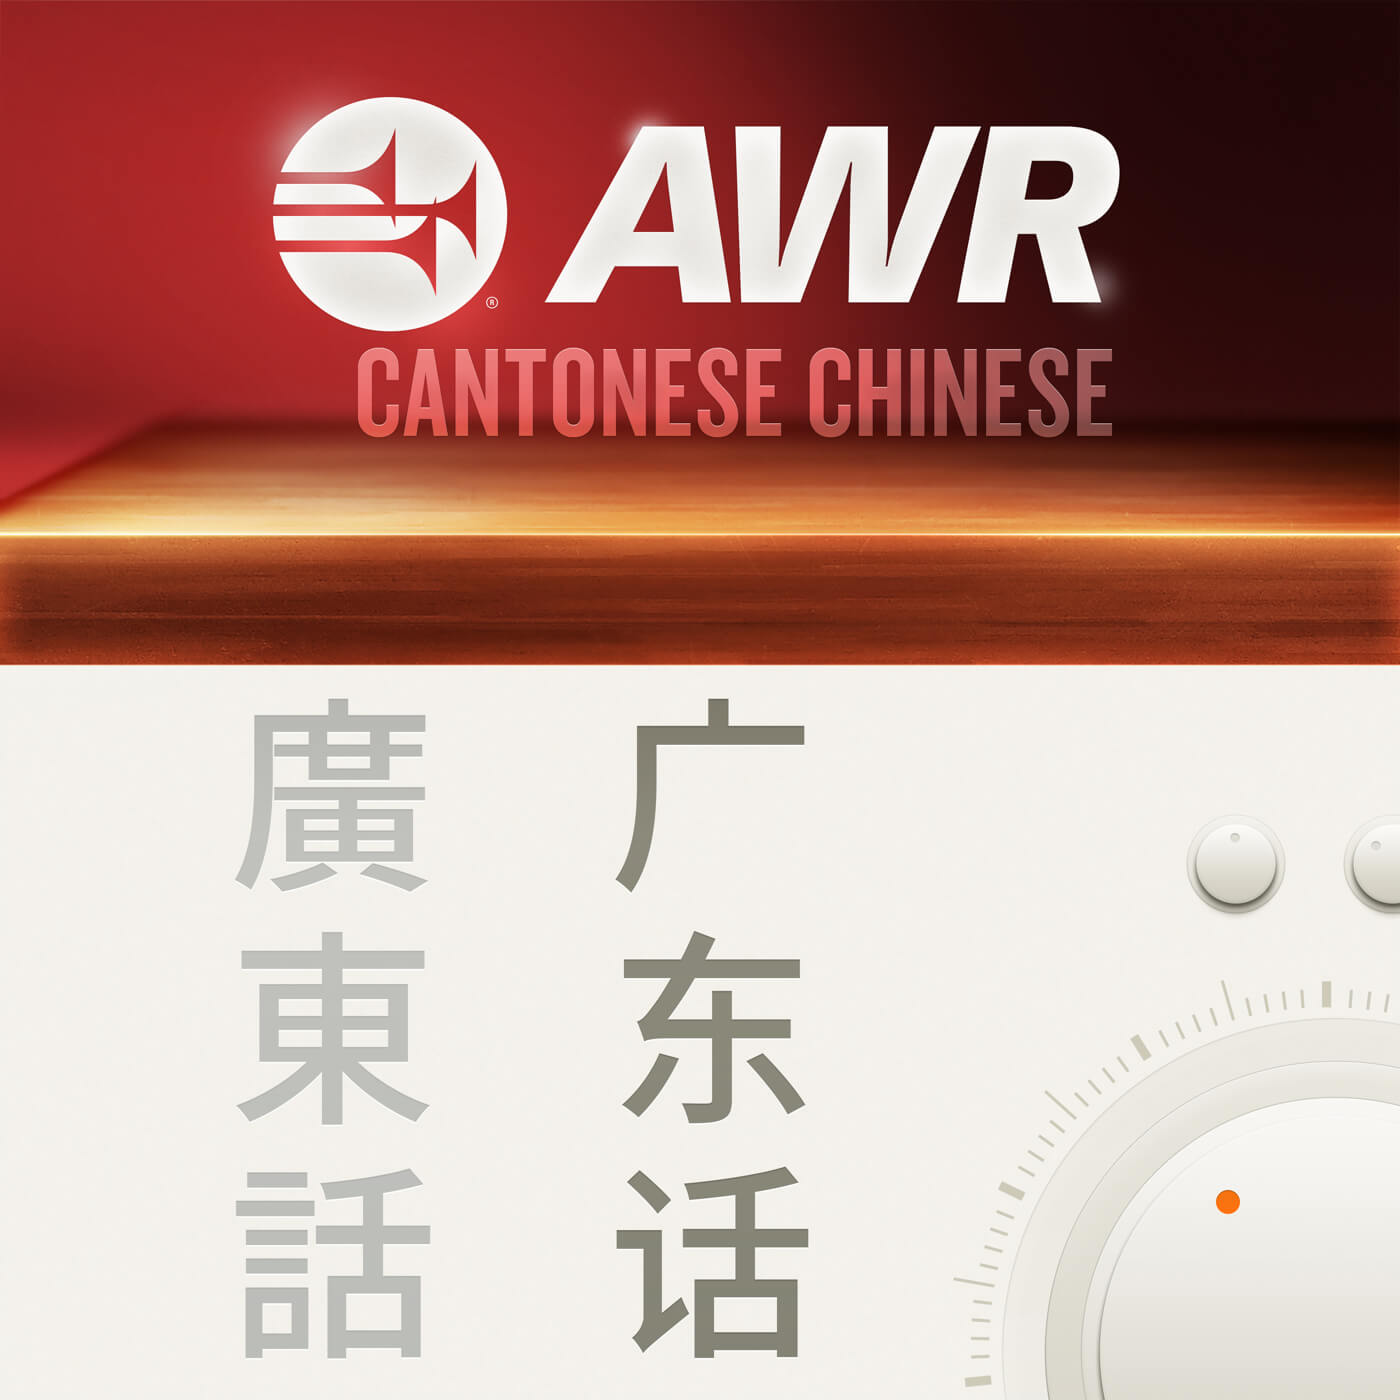 AWR Cantonese Chinese (HTH) – Highway To Heaven 天路